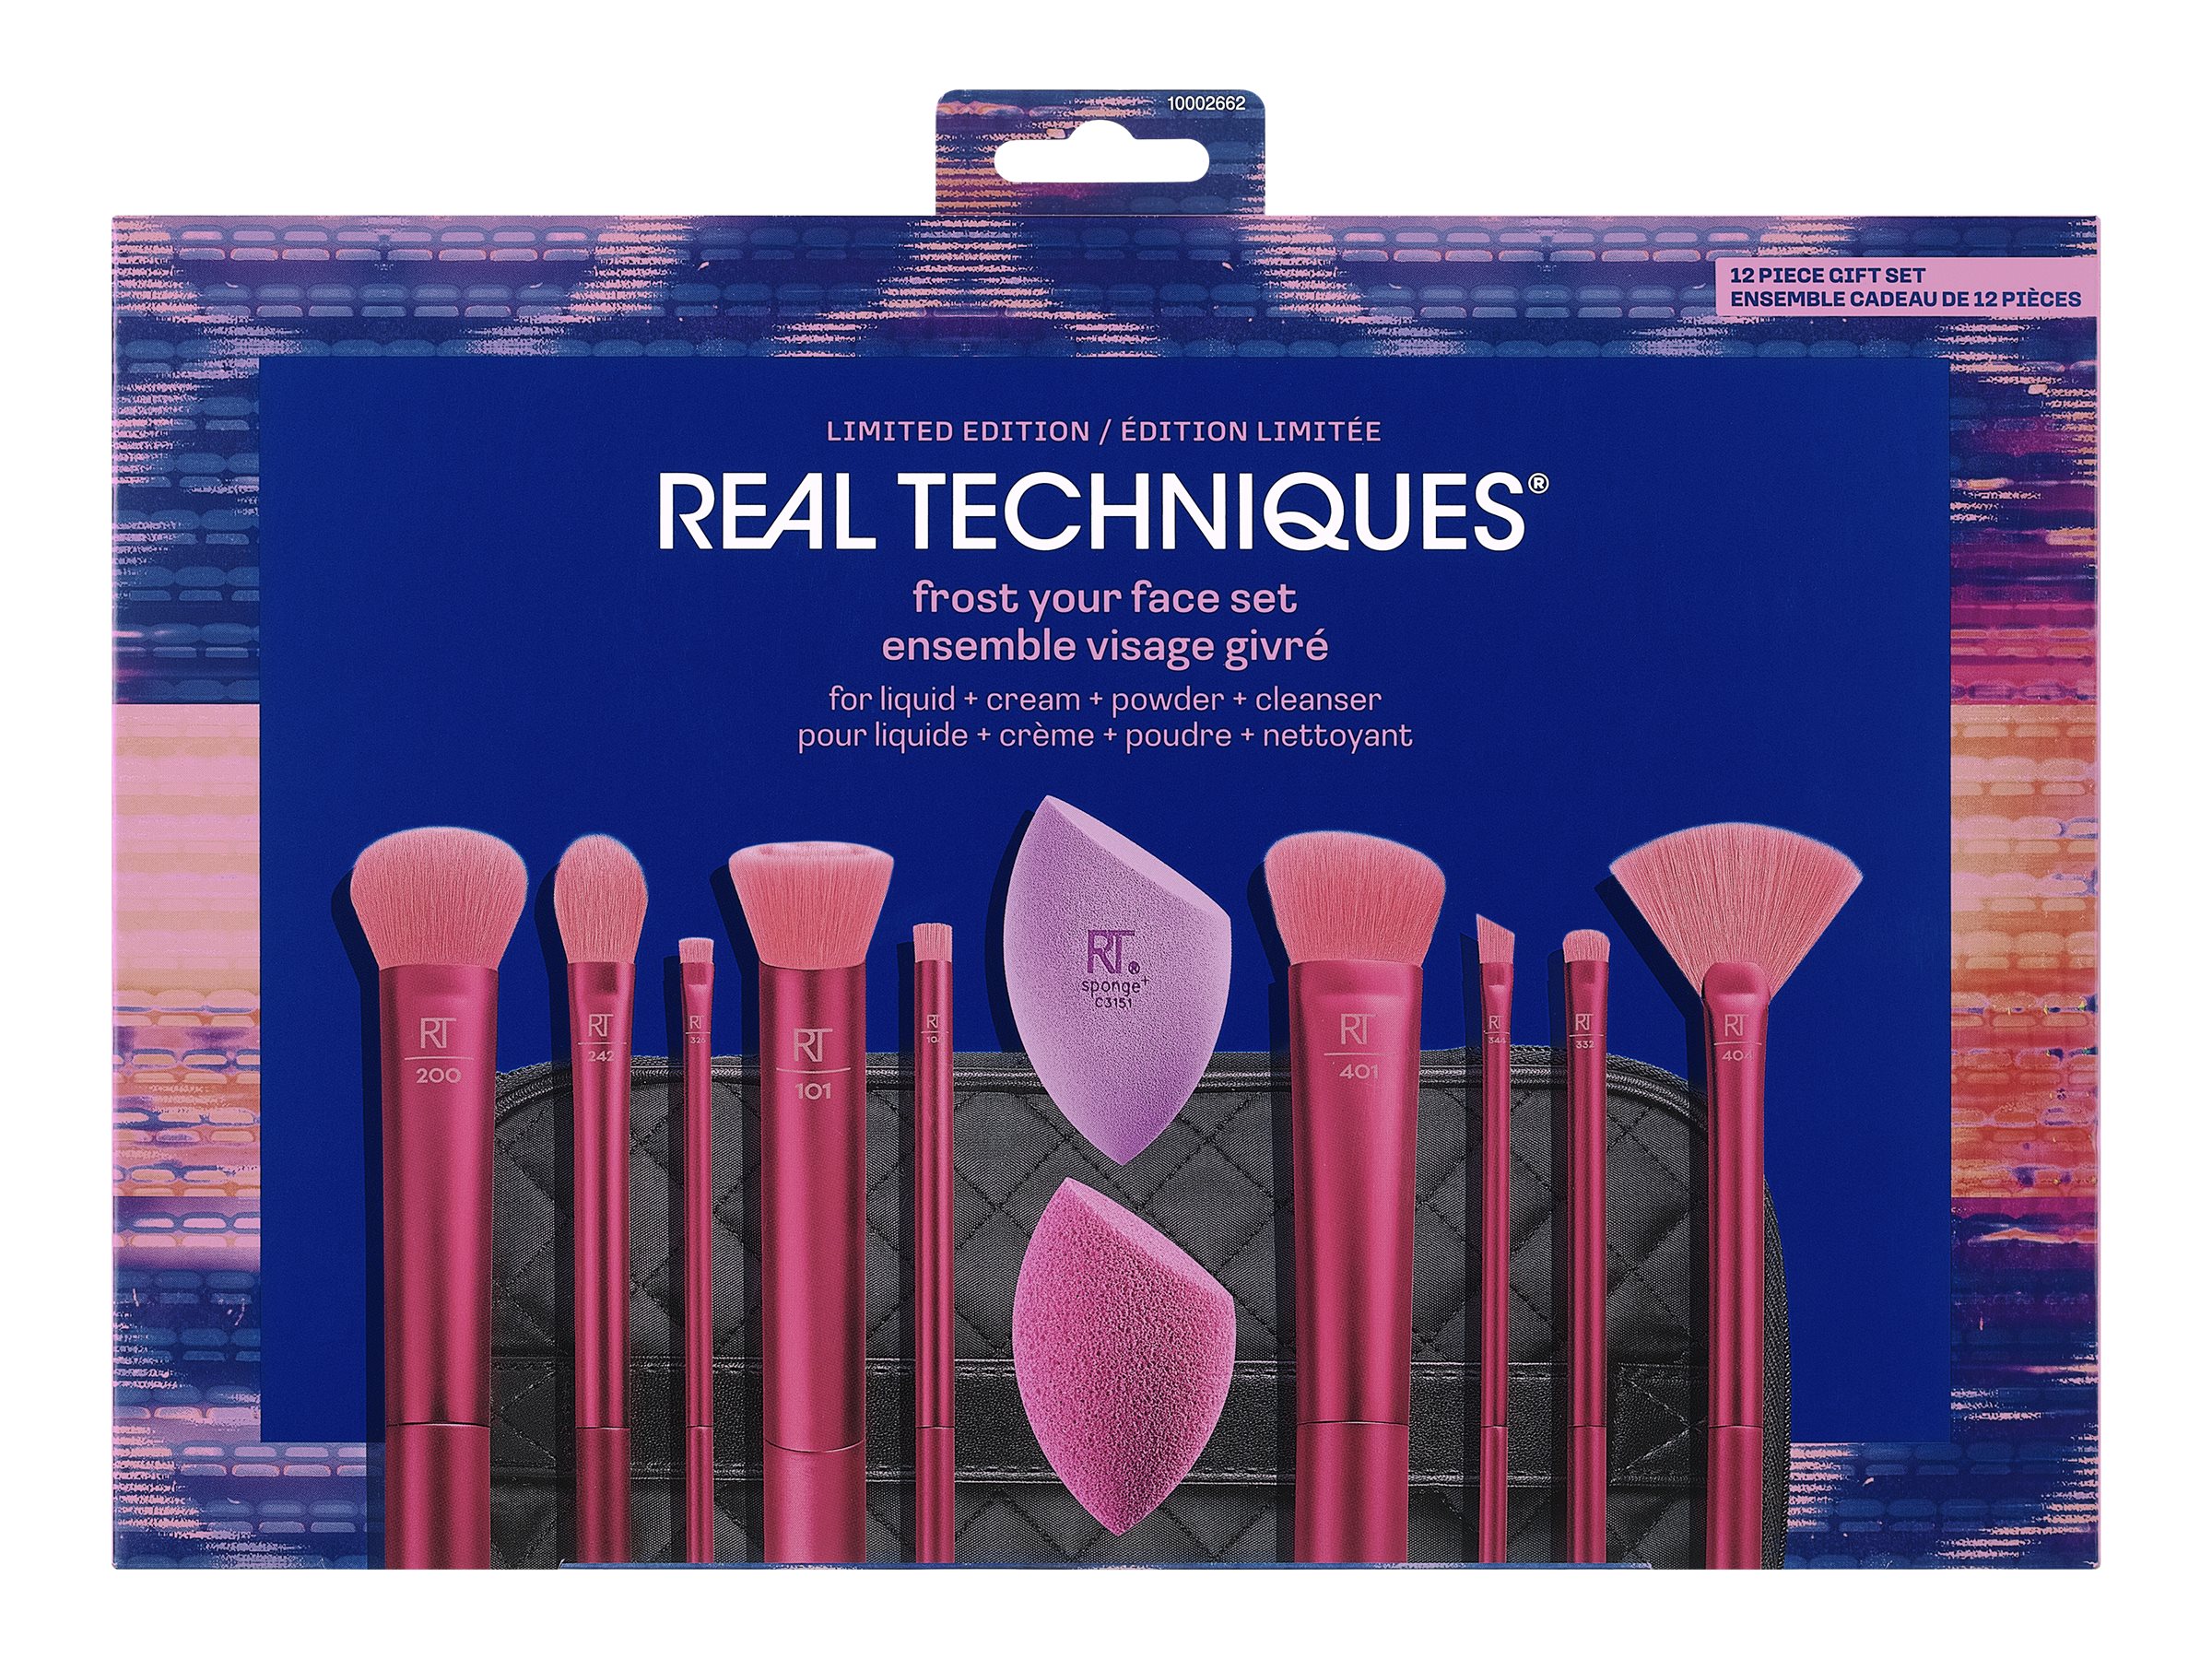 Real Techniques Limited Edition Frost Your Face Make-up Brush and Sponge Set - 12 piece